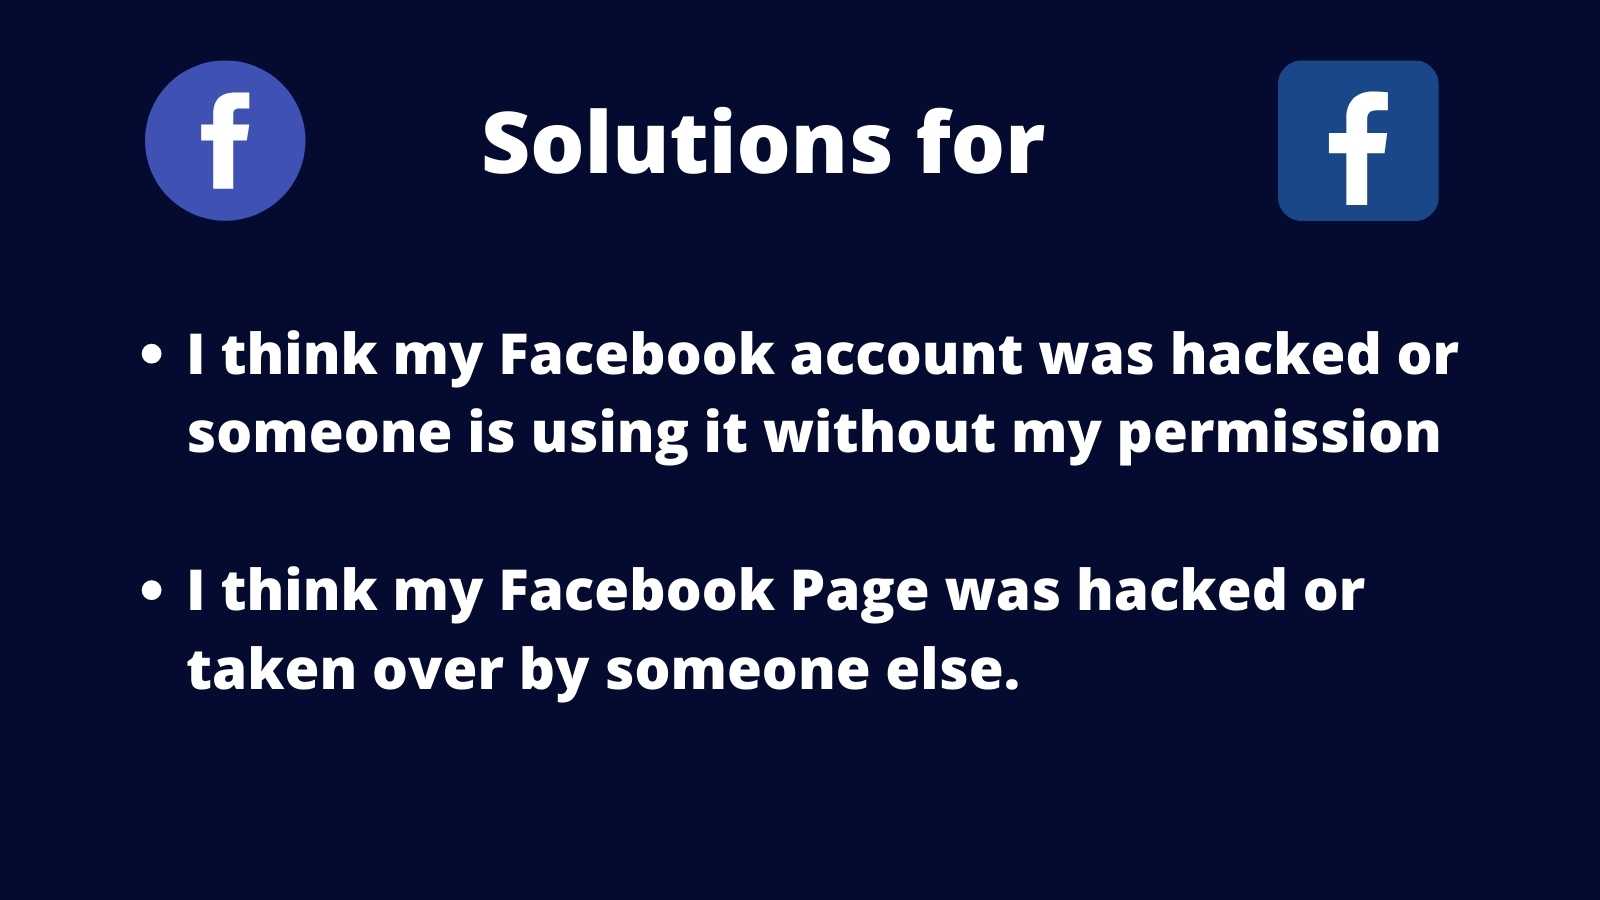 My facebook account was hacked by someone, Complete solution here 